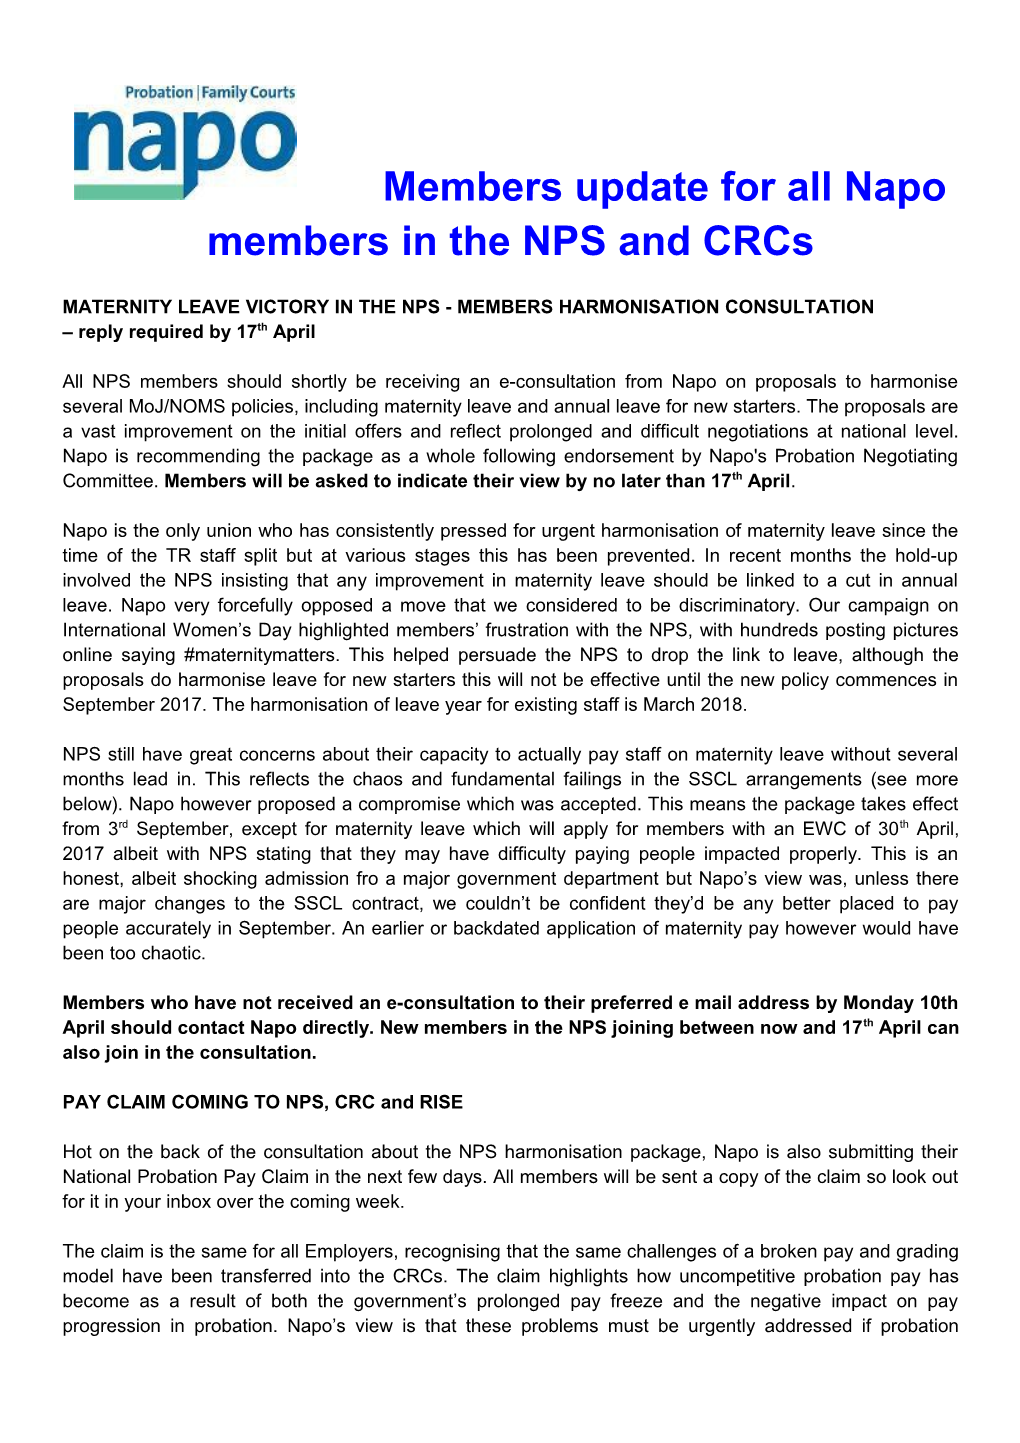 Maternity Leave Victory in the Nps - Members Harmonisation Consultation